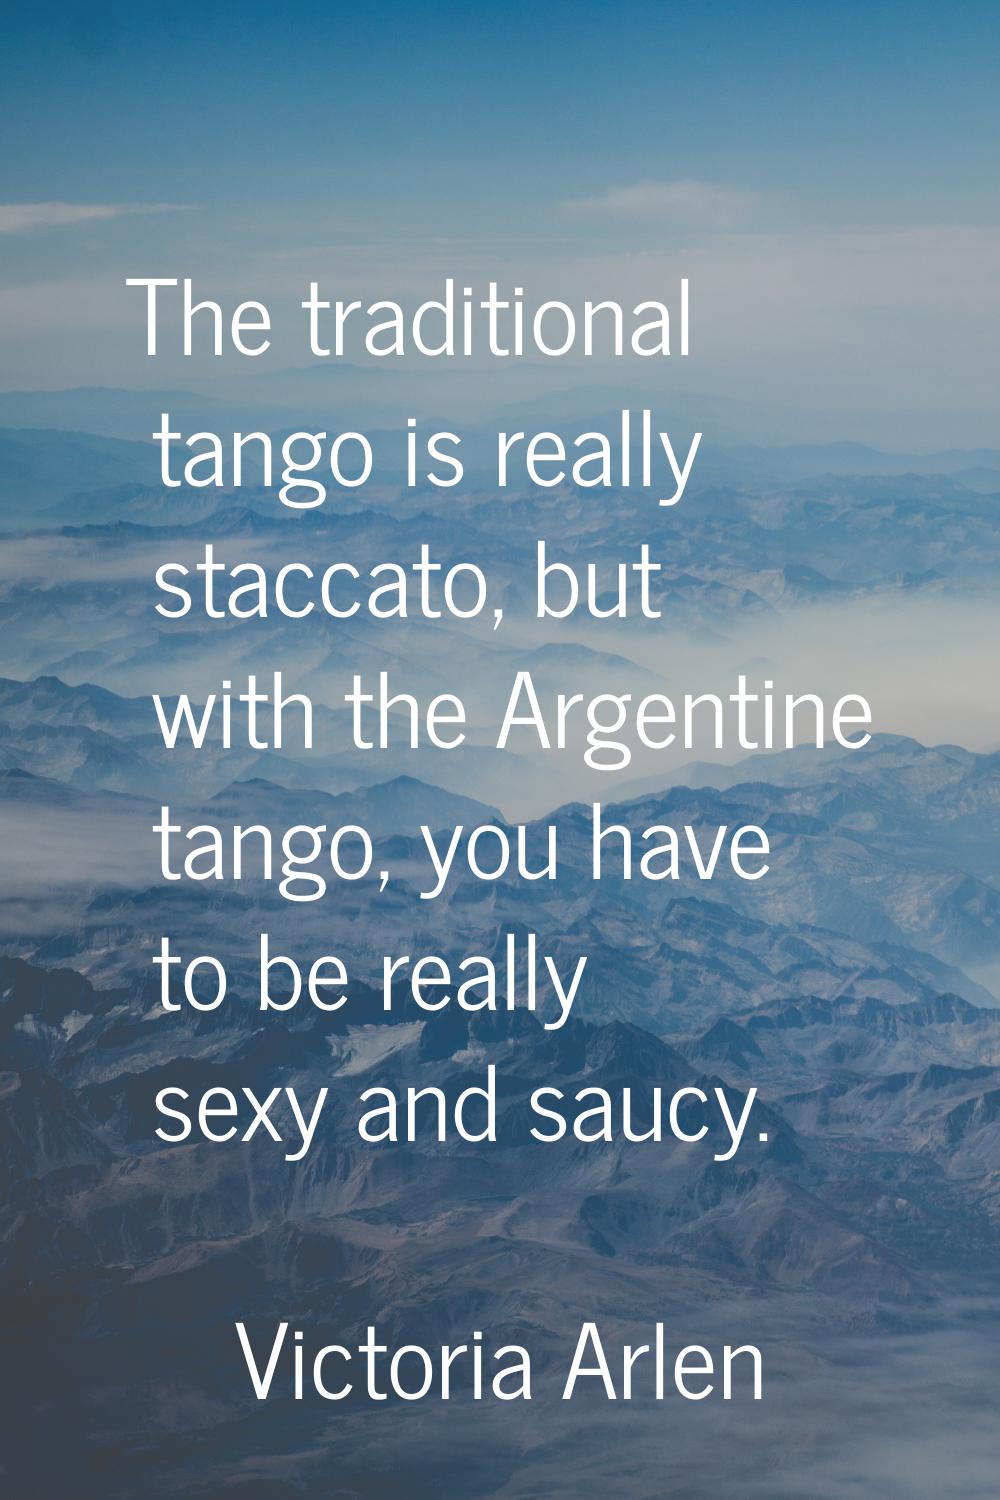 The traditional tango is really staccato, but with the Argentine tango, you have to be really sexy 